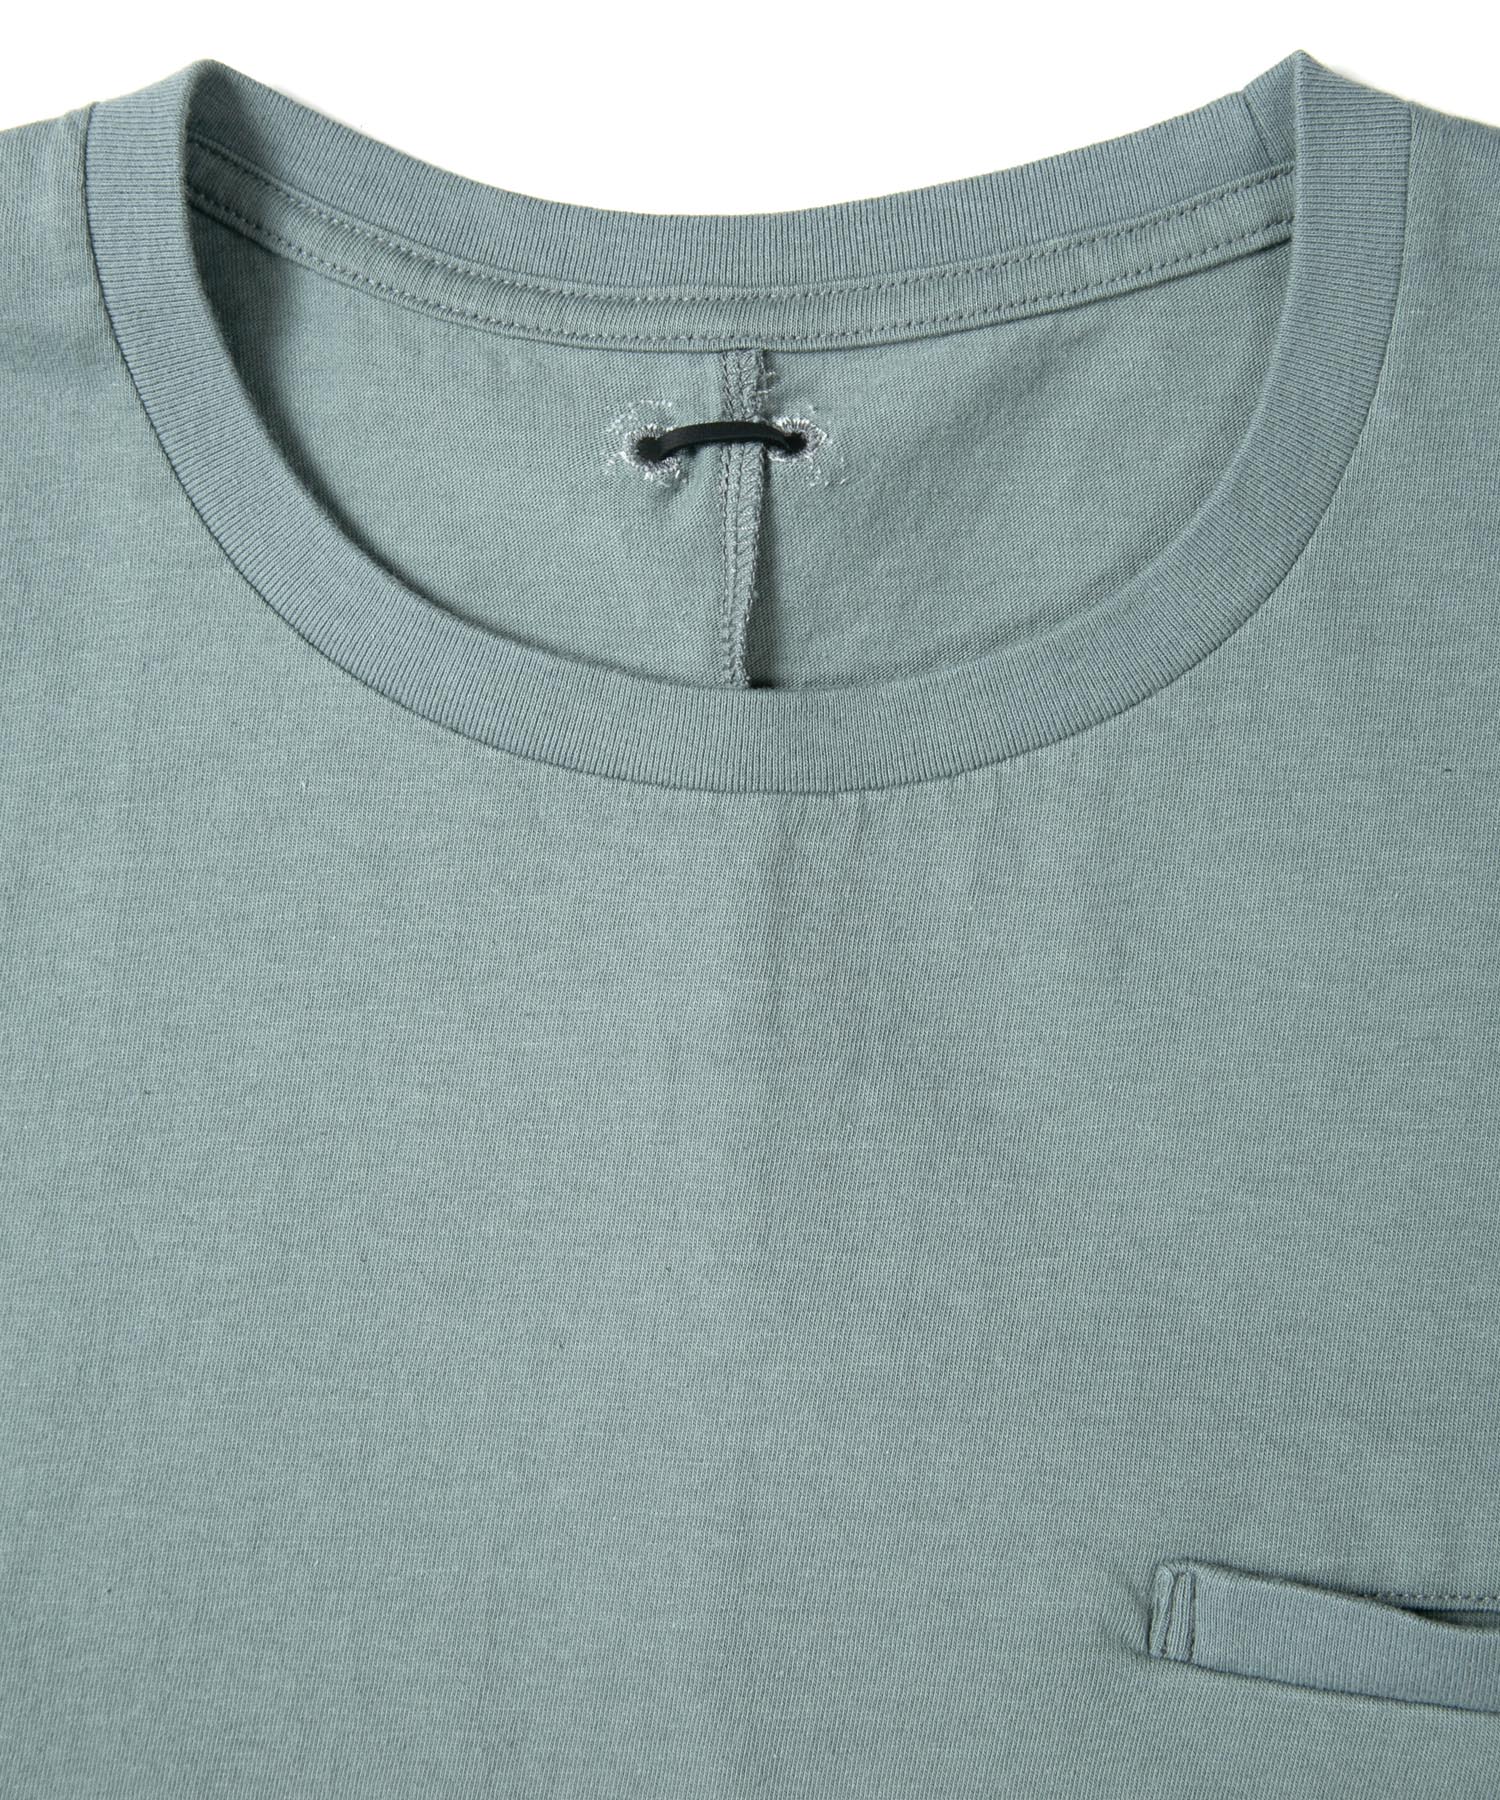 Load image into Gallery viewer, Natural Soft Cotton Crew Neck T-shirt - BLUE GRAY